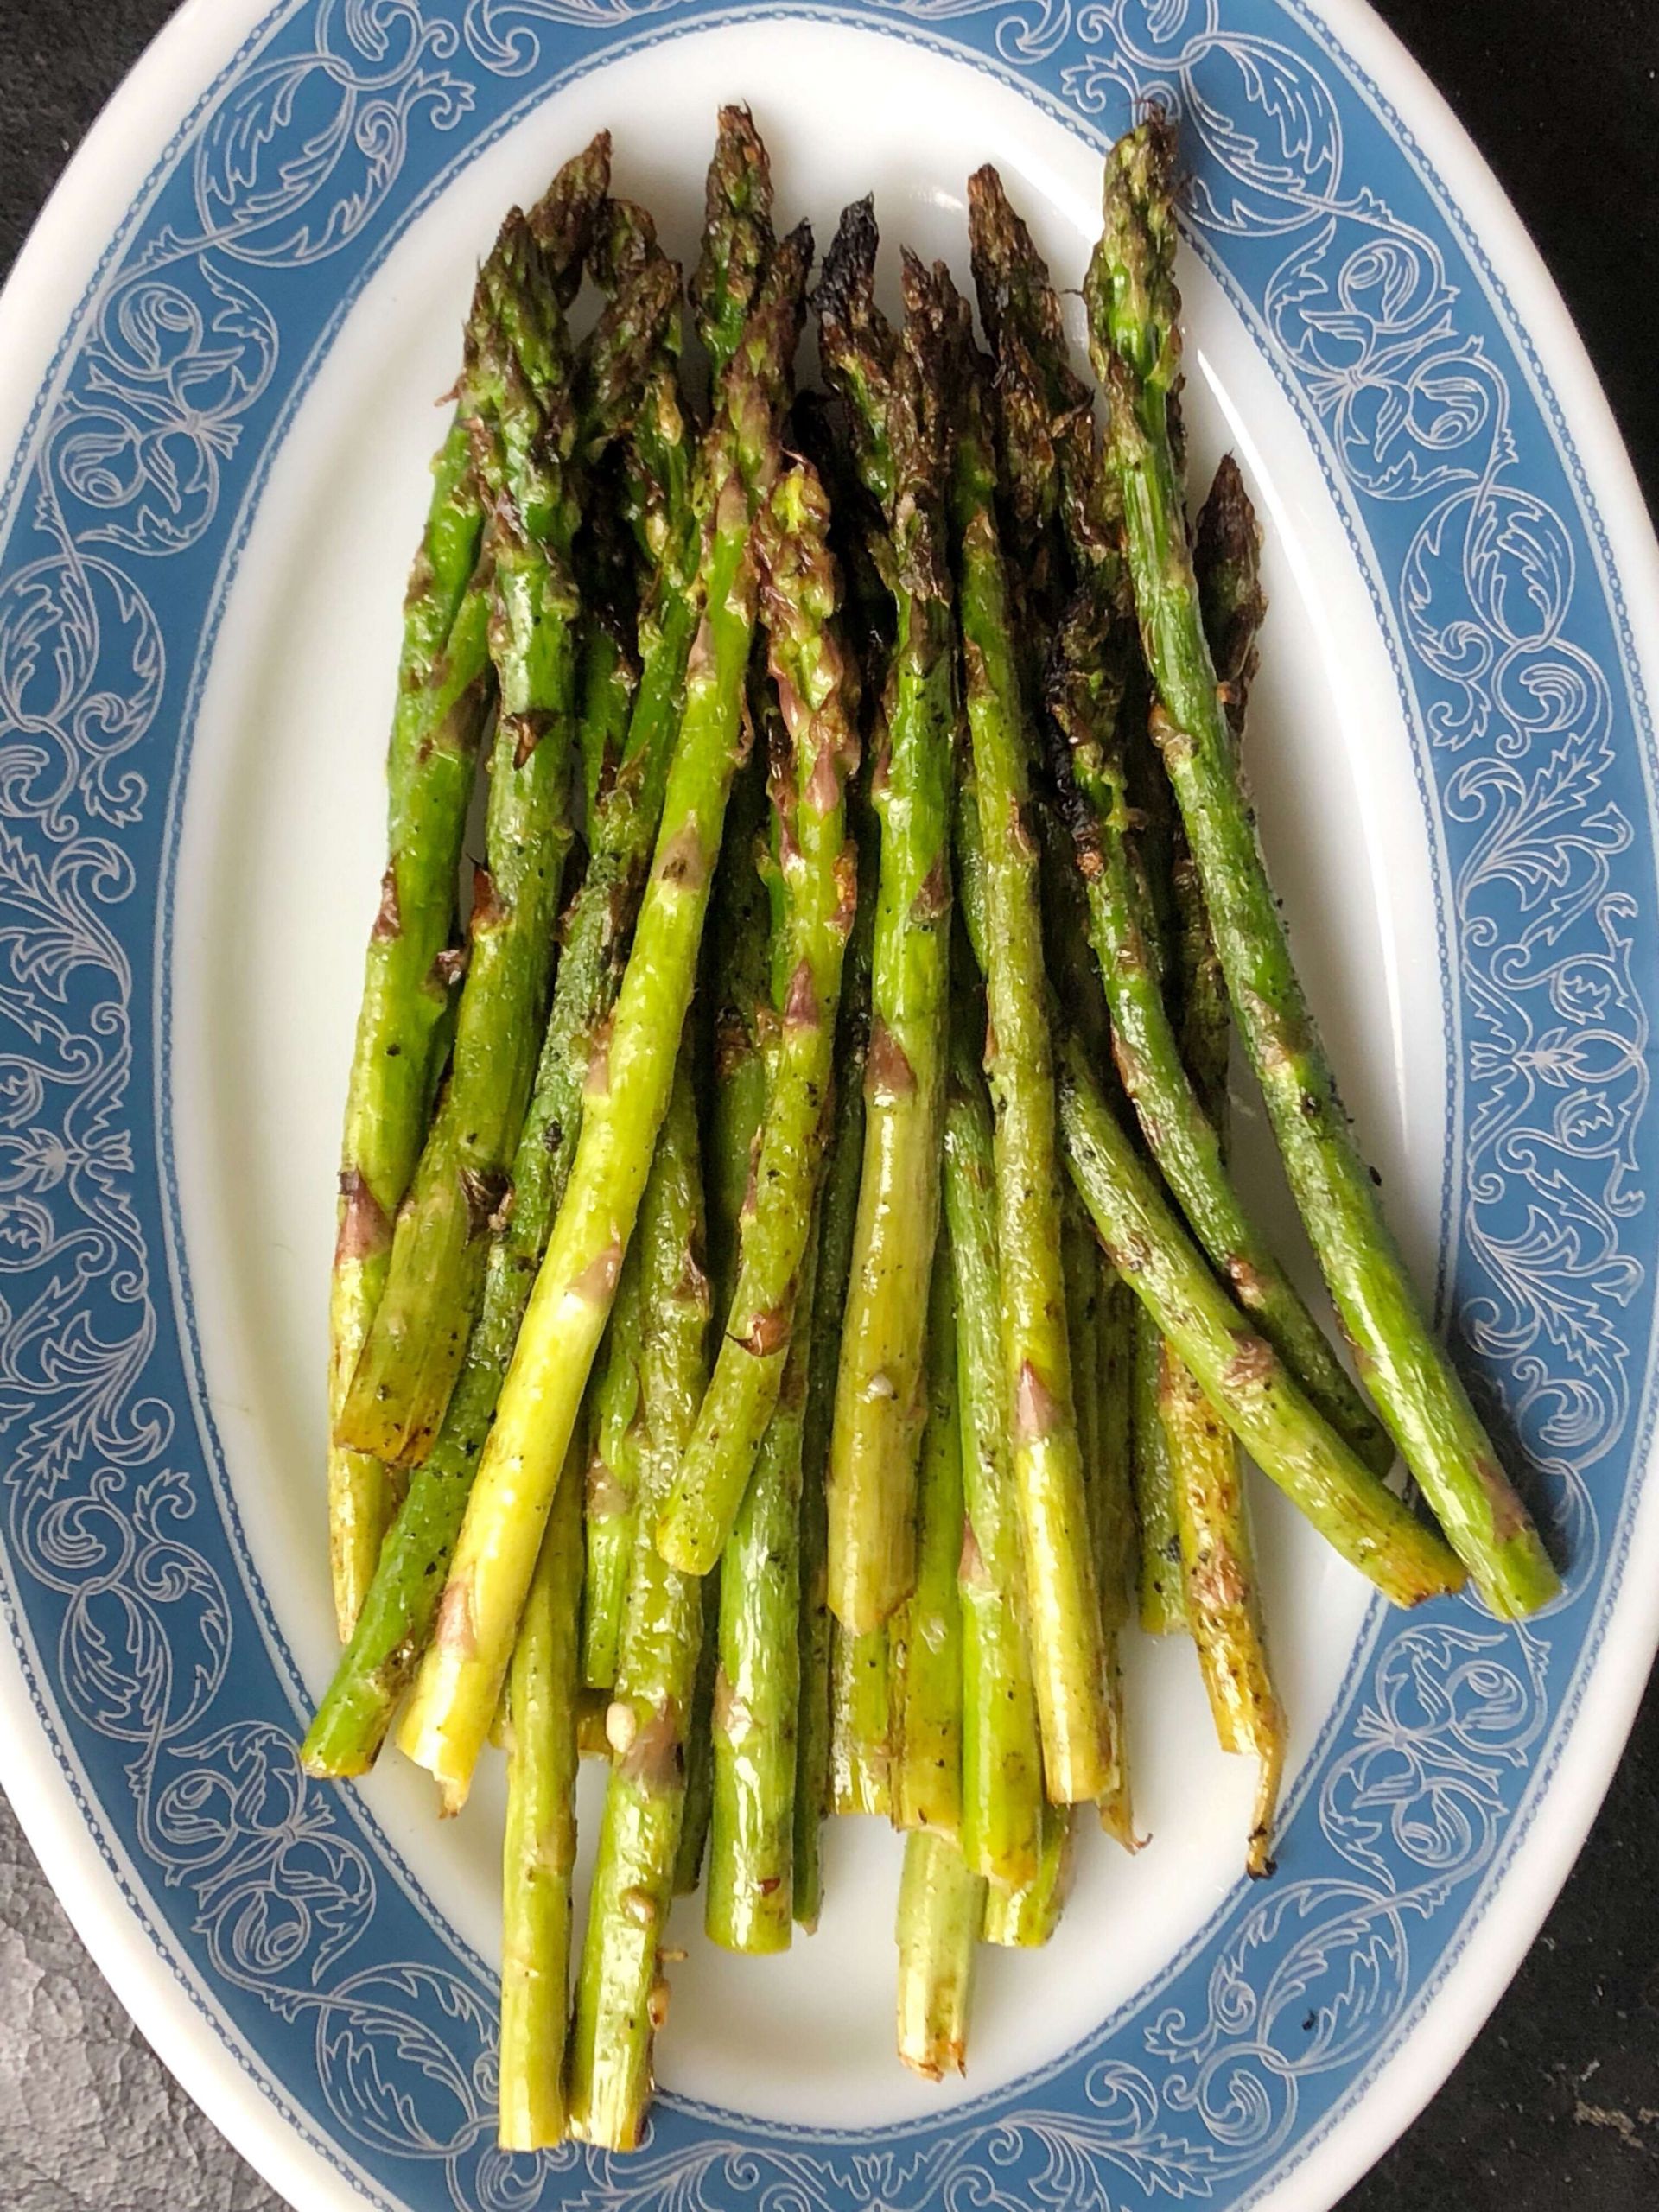 Cooking Asparagus On The Grill
 Garlic & Olive Oil Grilled Asparagus The Kitchen Magpie